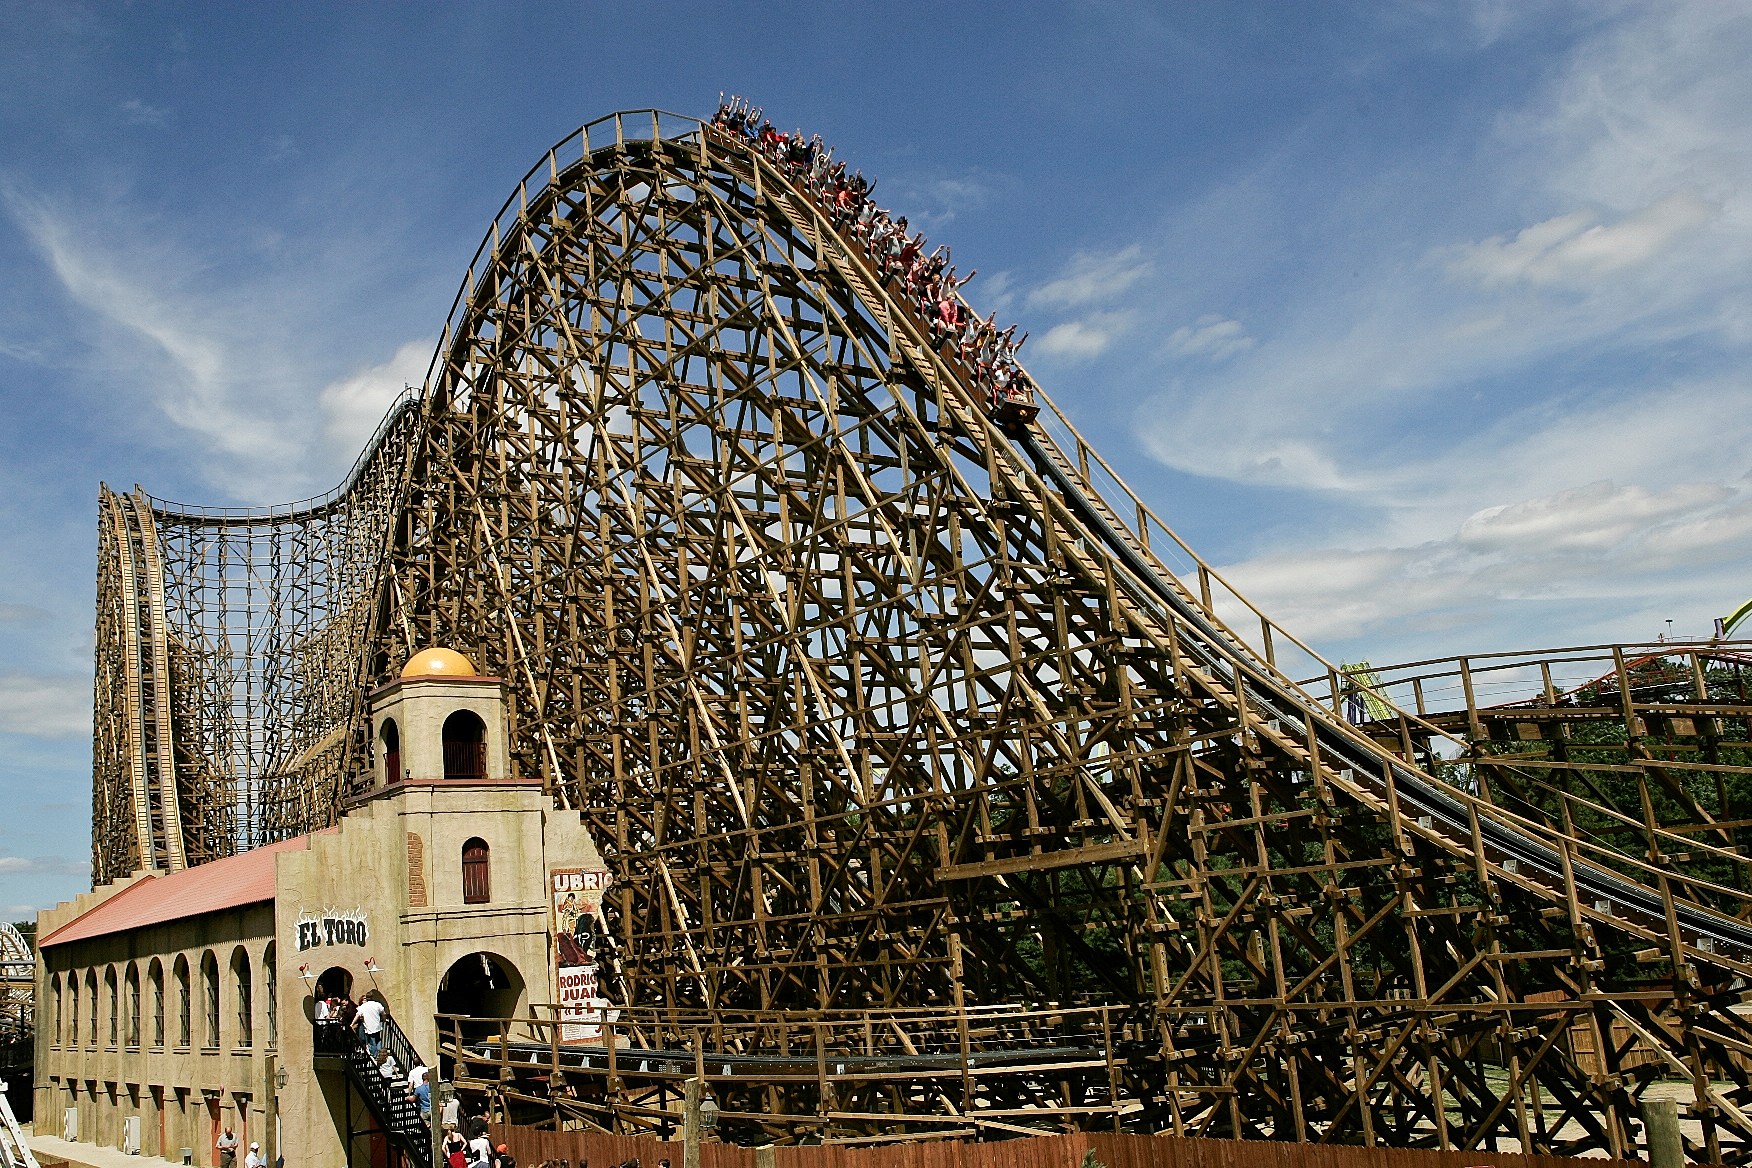 Here's what Six Flags should consider doing with El Toro coaster